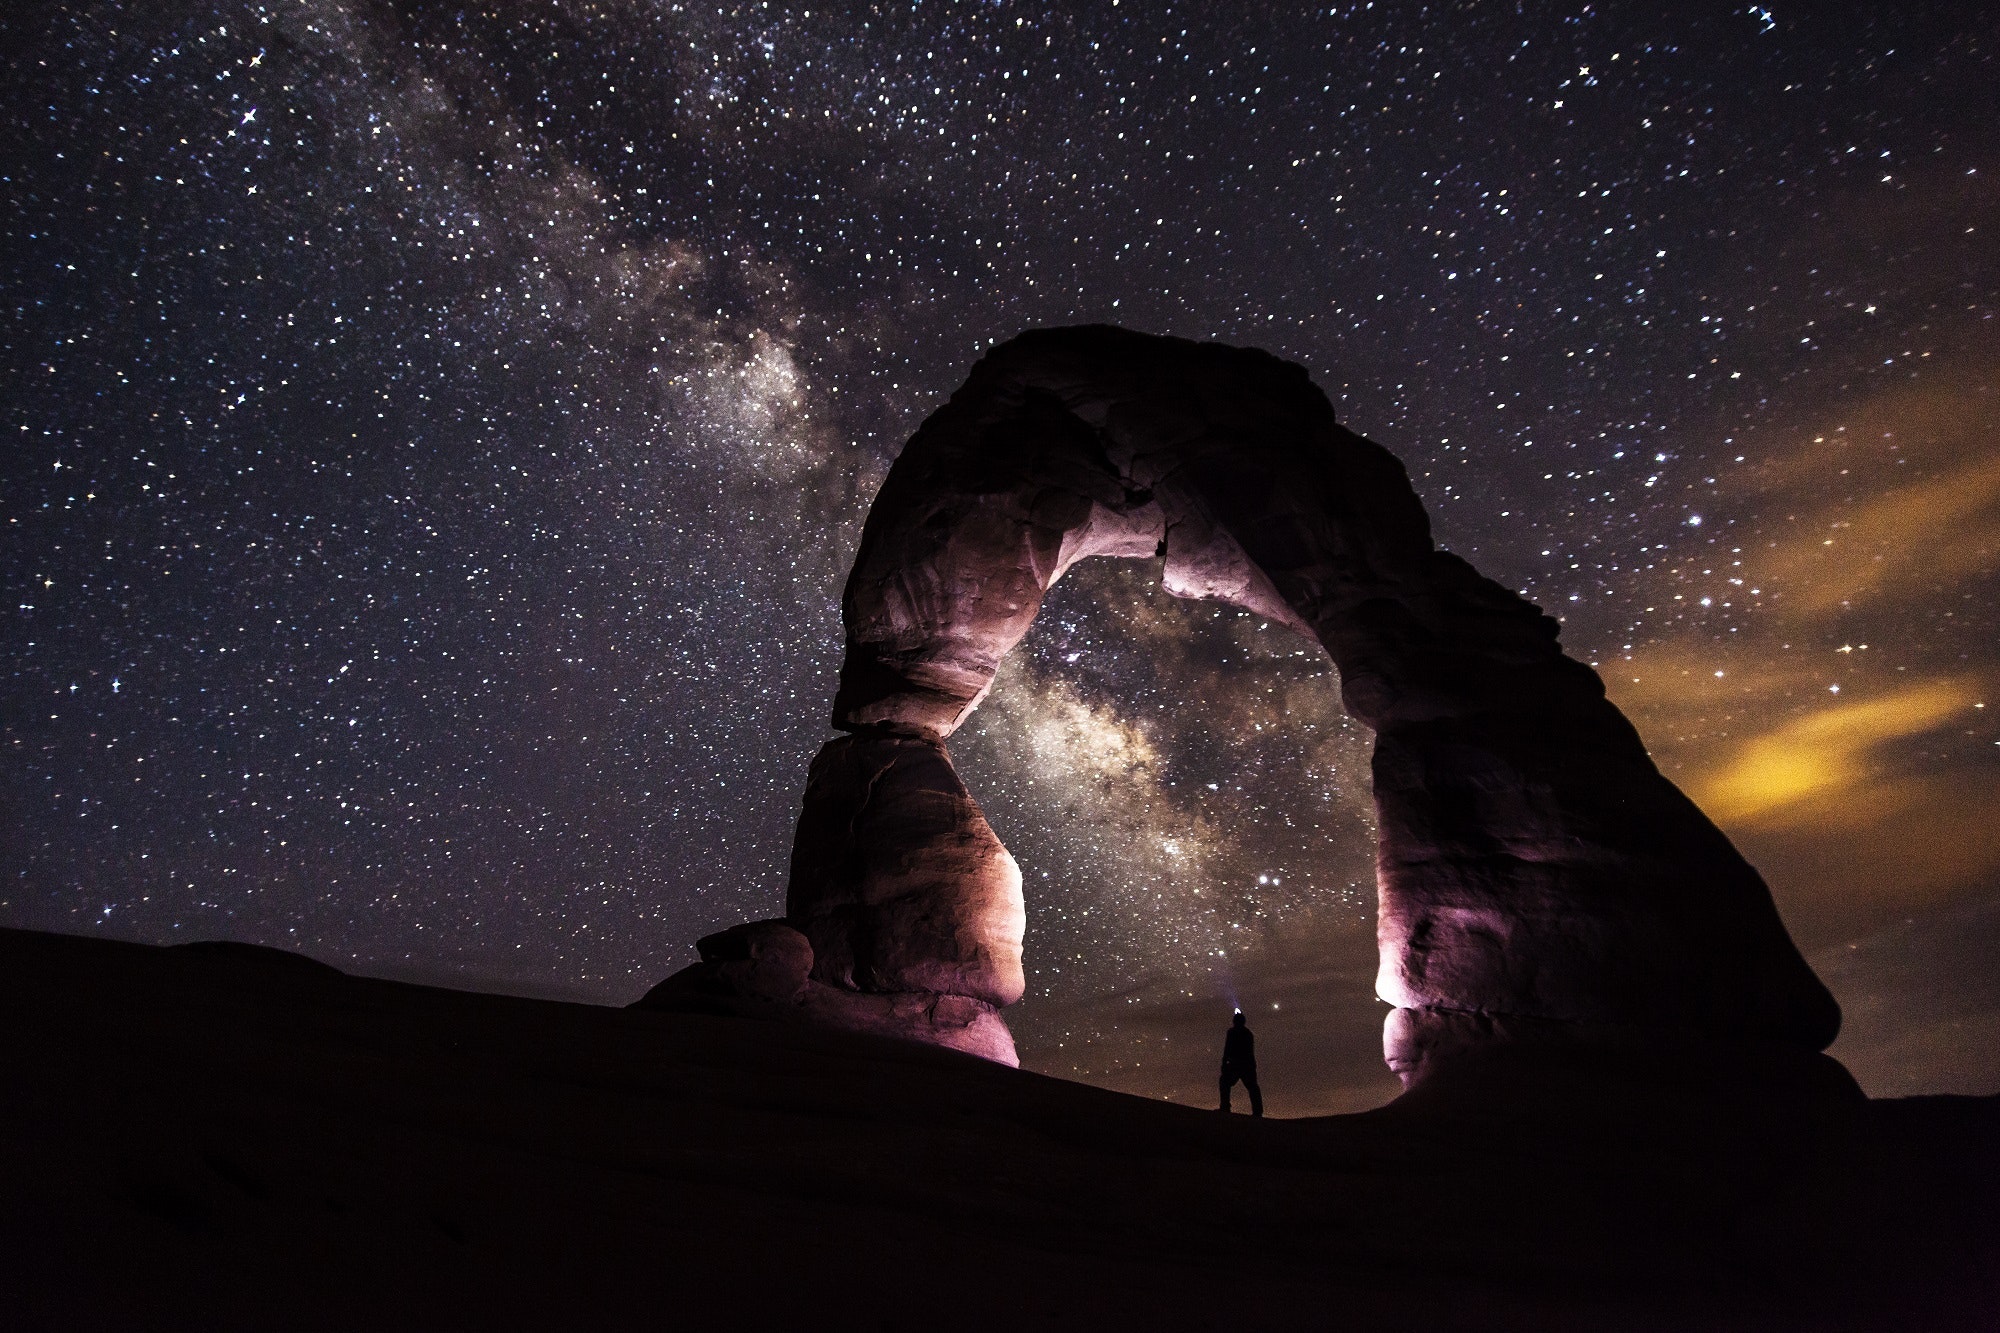 A photo of an arch with a sky full with stars at the background.